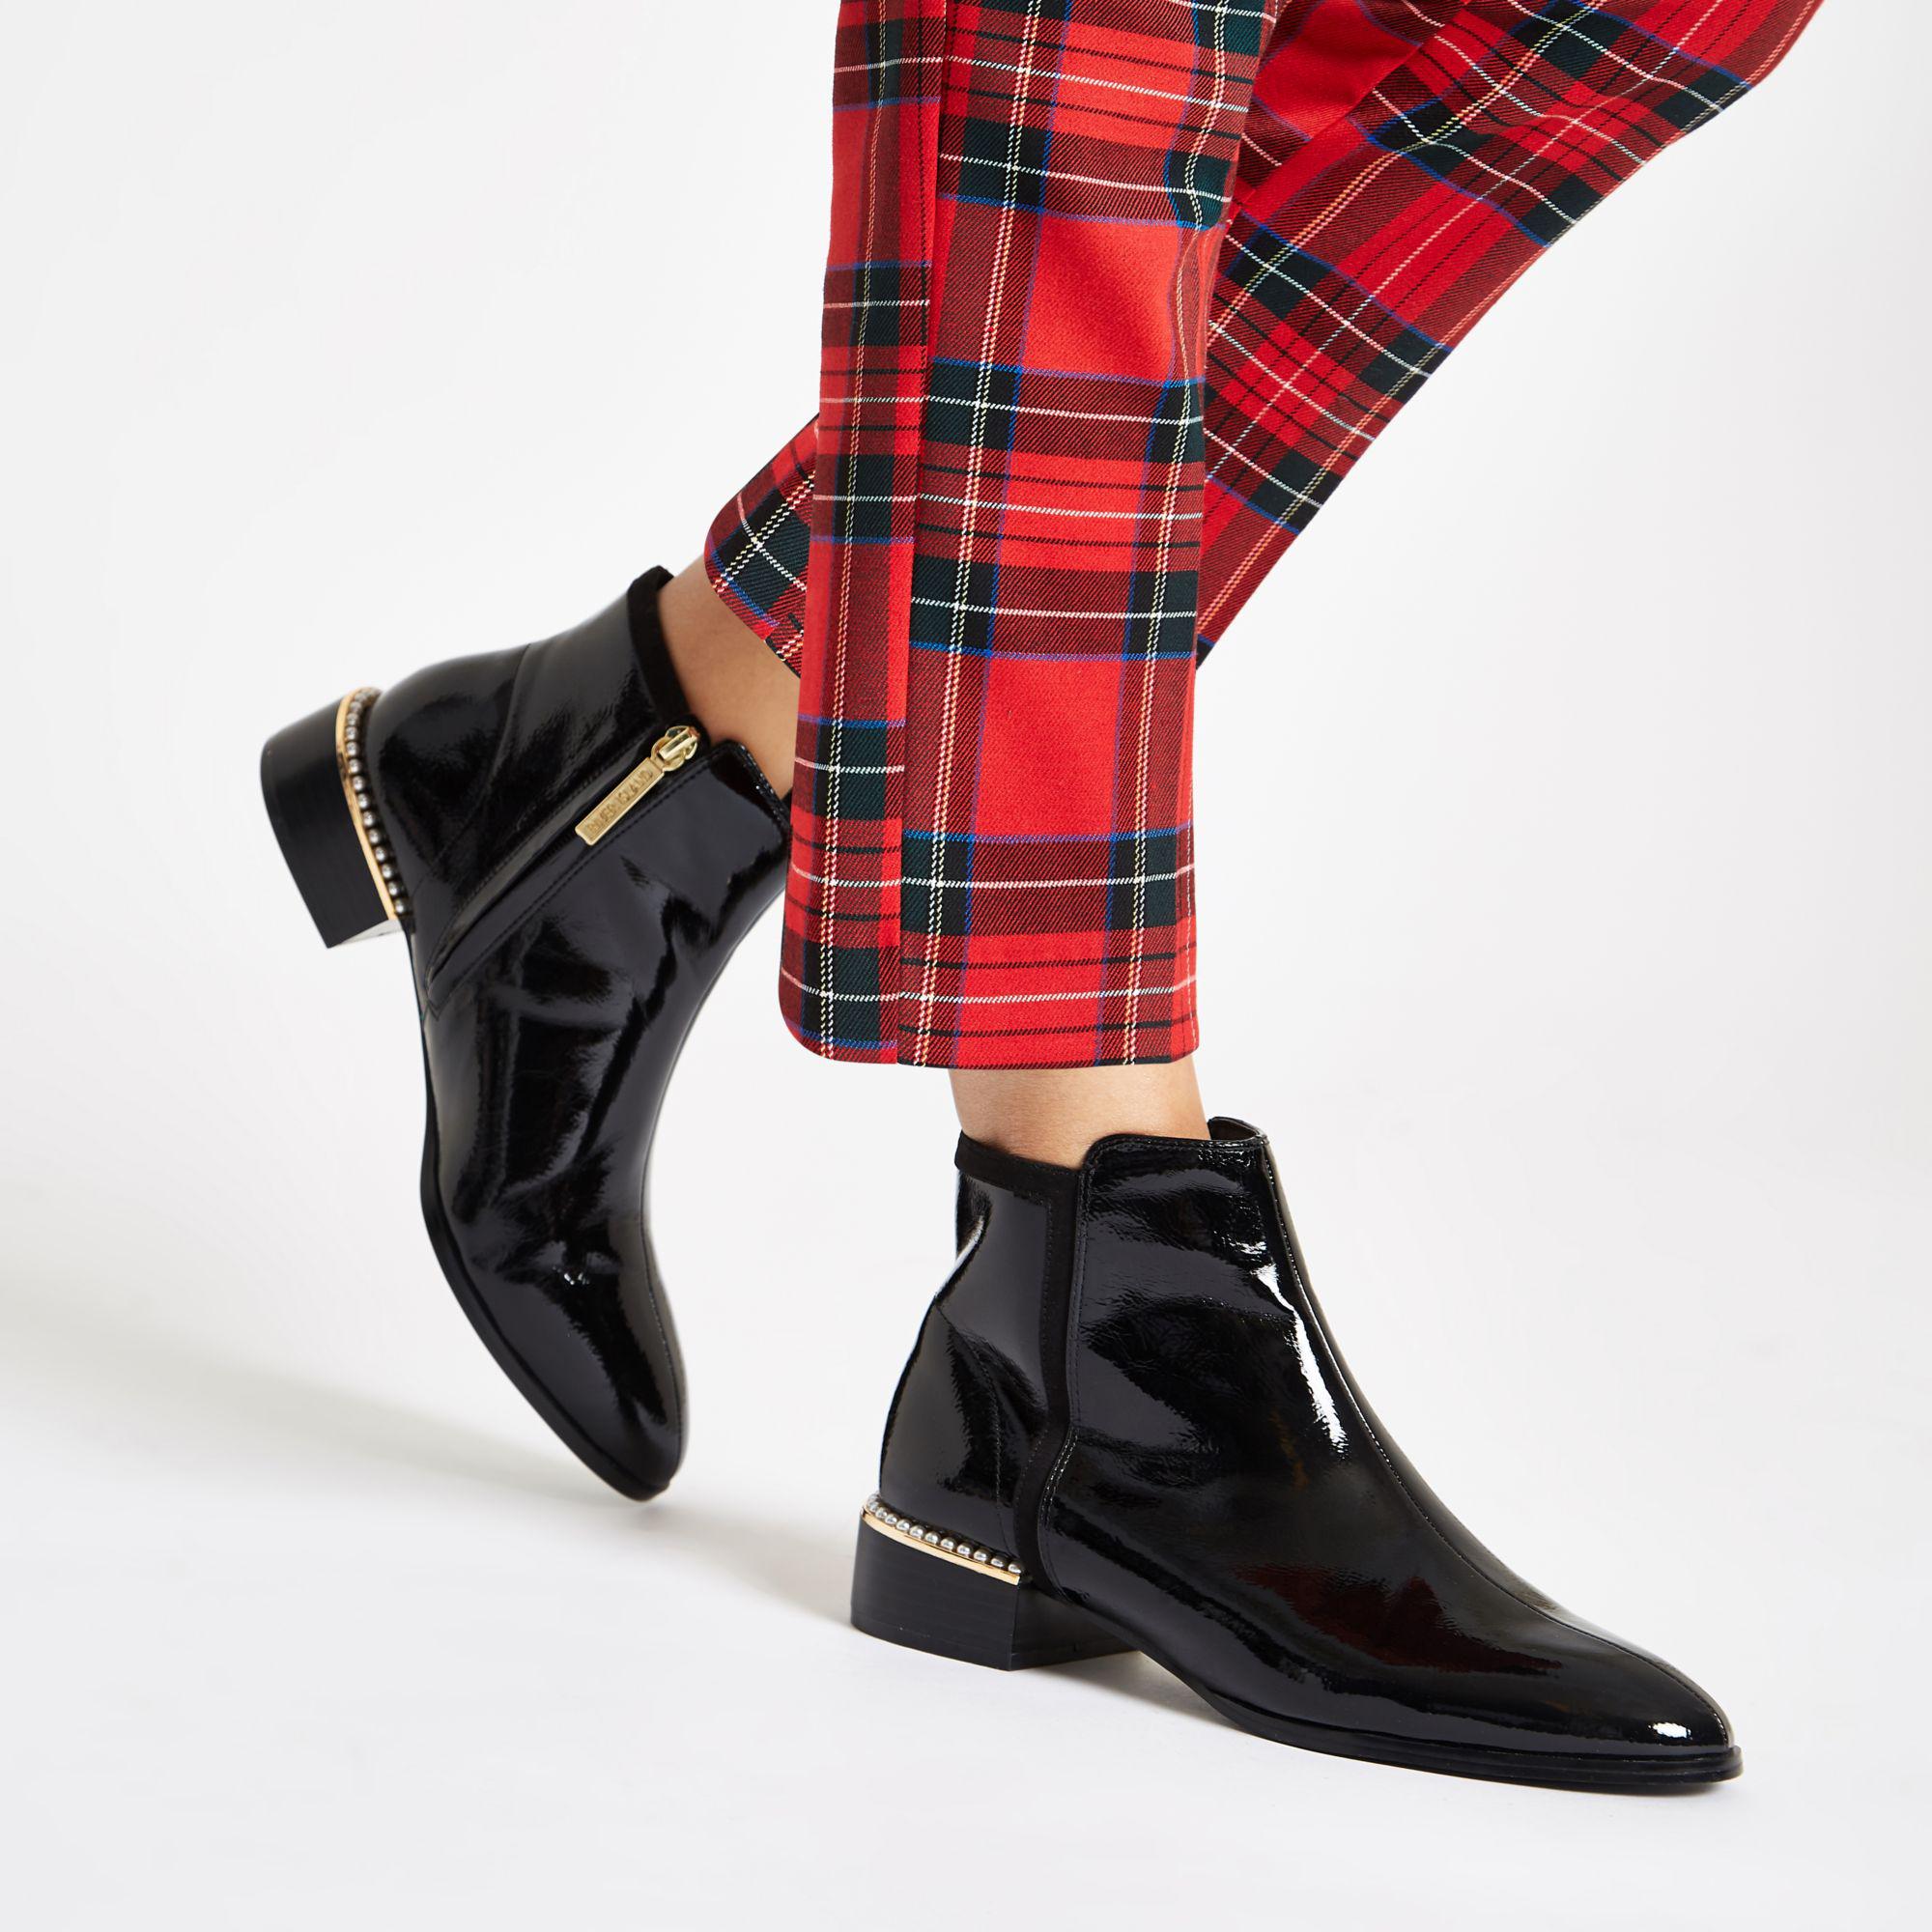 River Island Black Patent Leather Pearl Trim Ankle Boots | Lyst